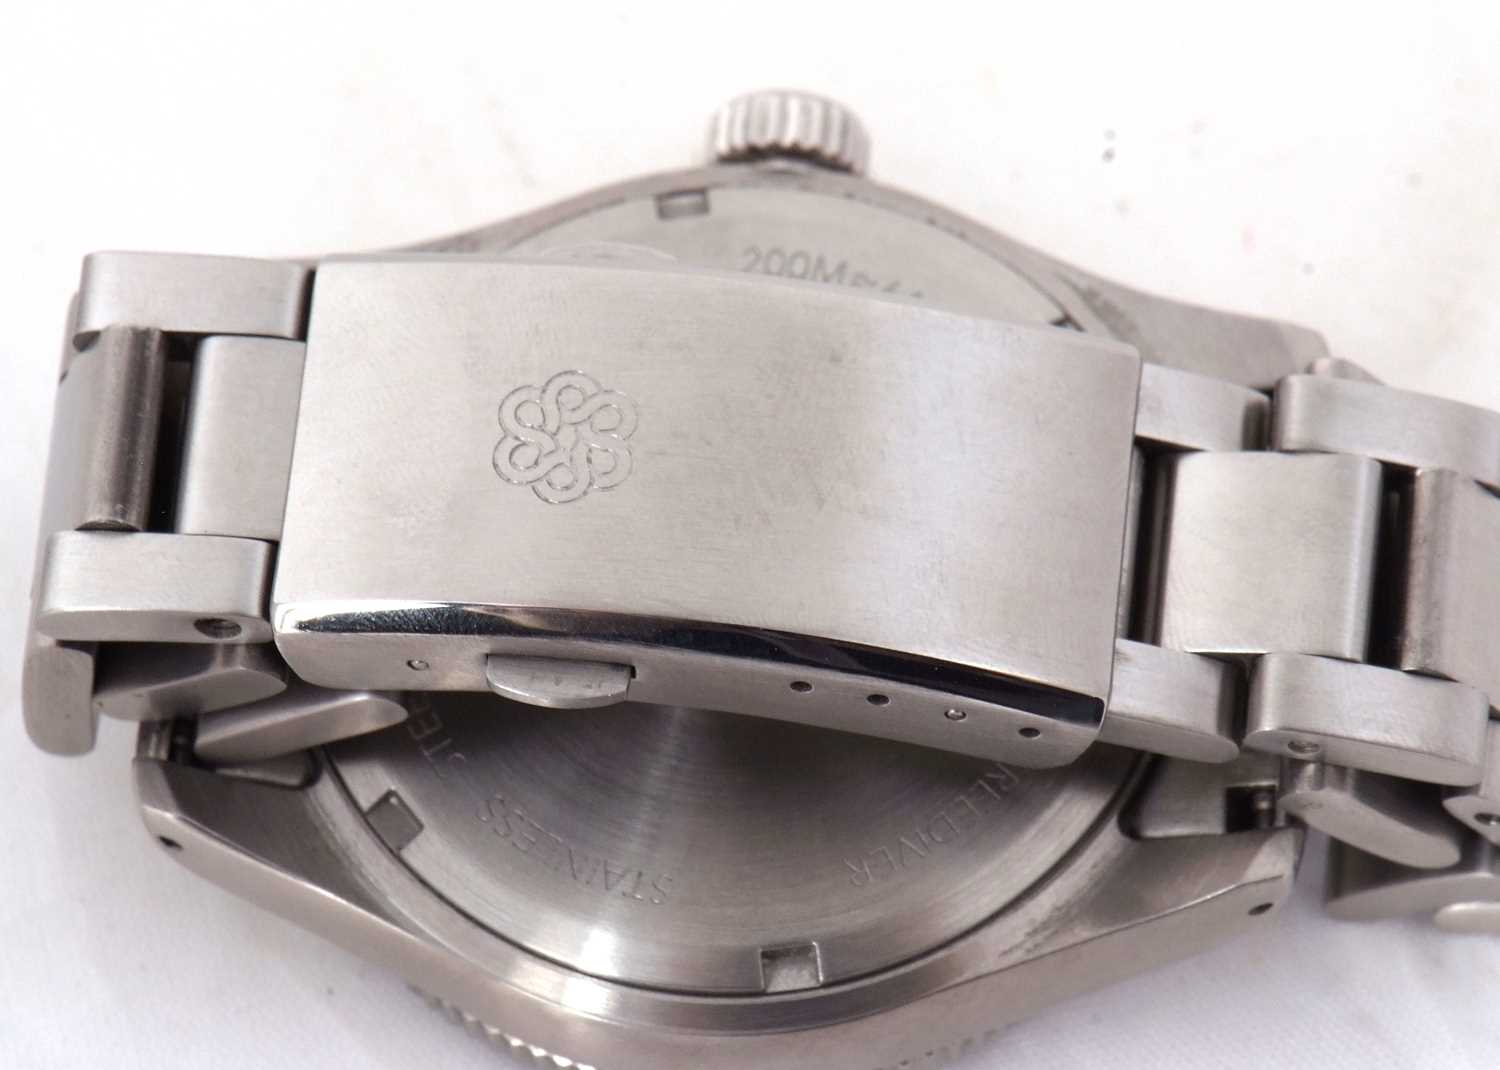 A Traska automatic gents divers wristwatch, the watch has a stainless steel case and bracelet, it - Image 6 of 6